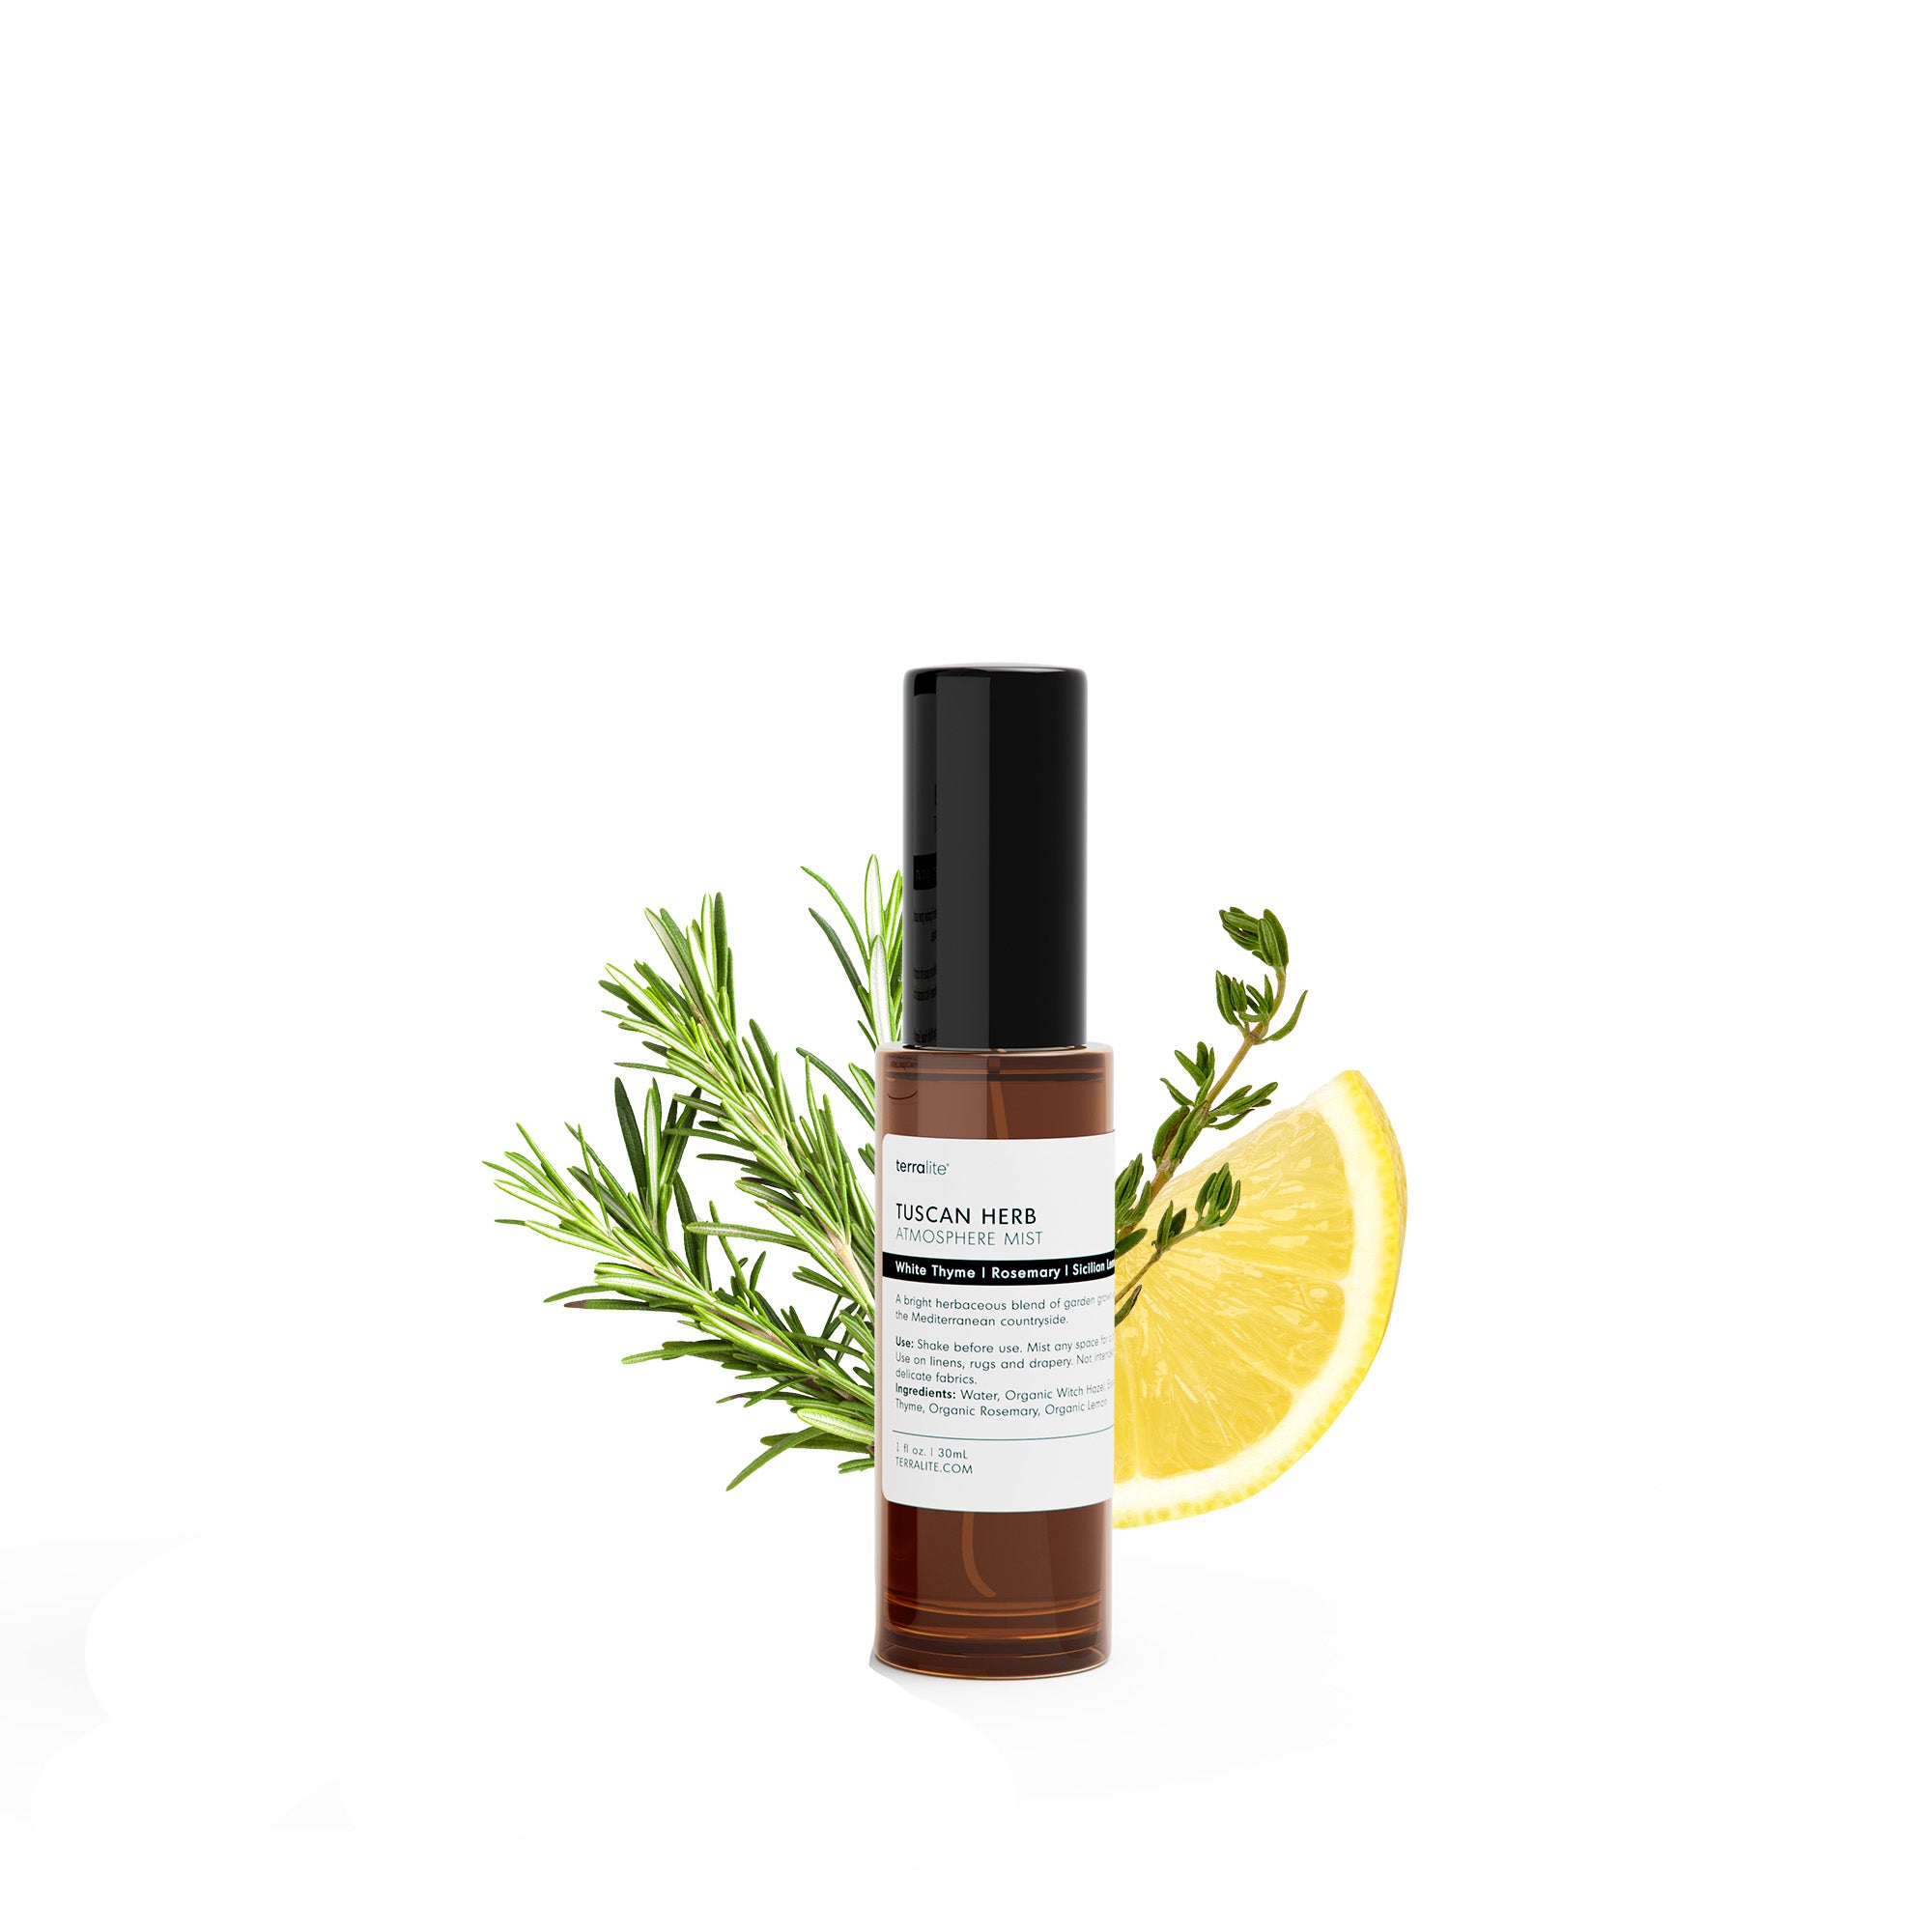 Tuscan Herb Organic Room Spray - 30ml made with essential oils